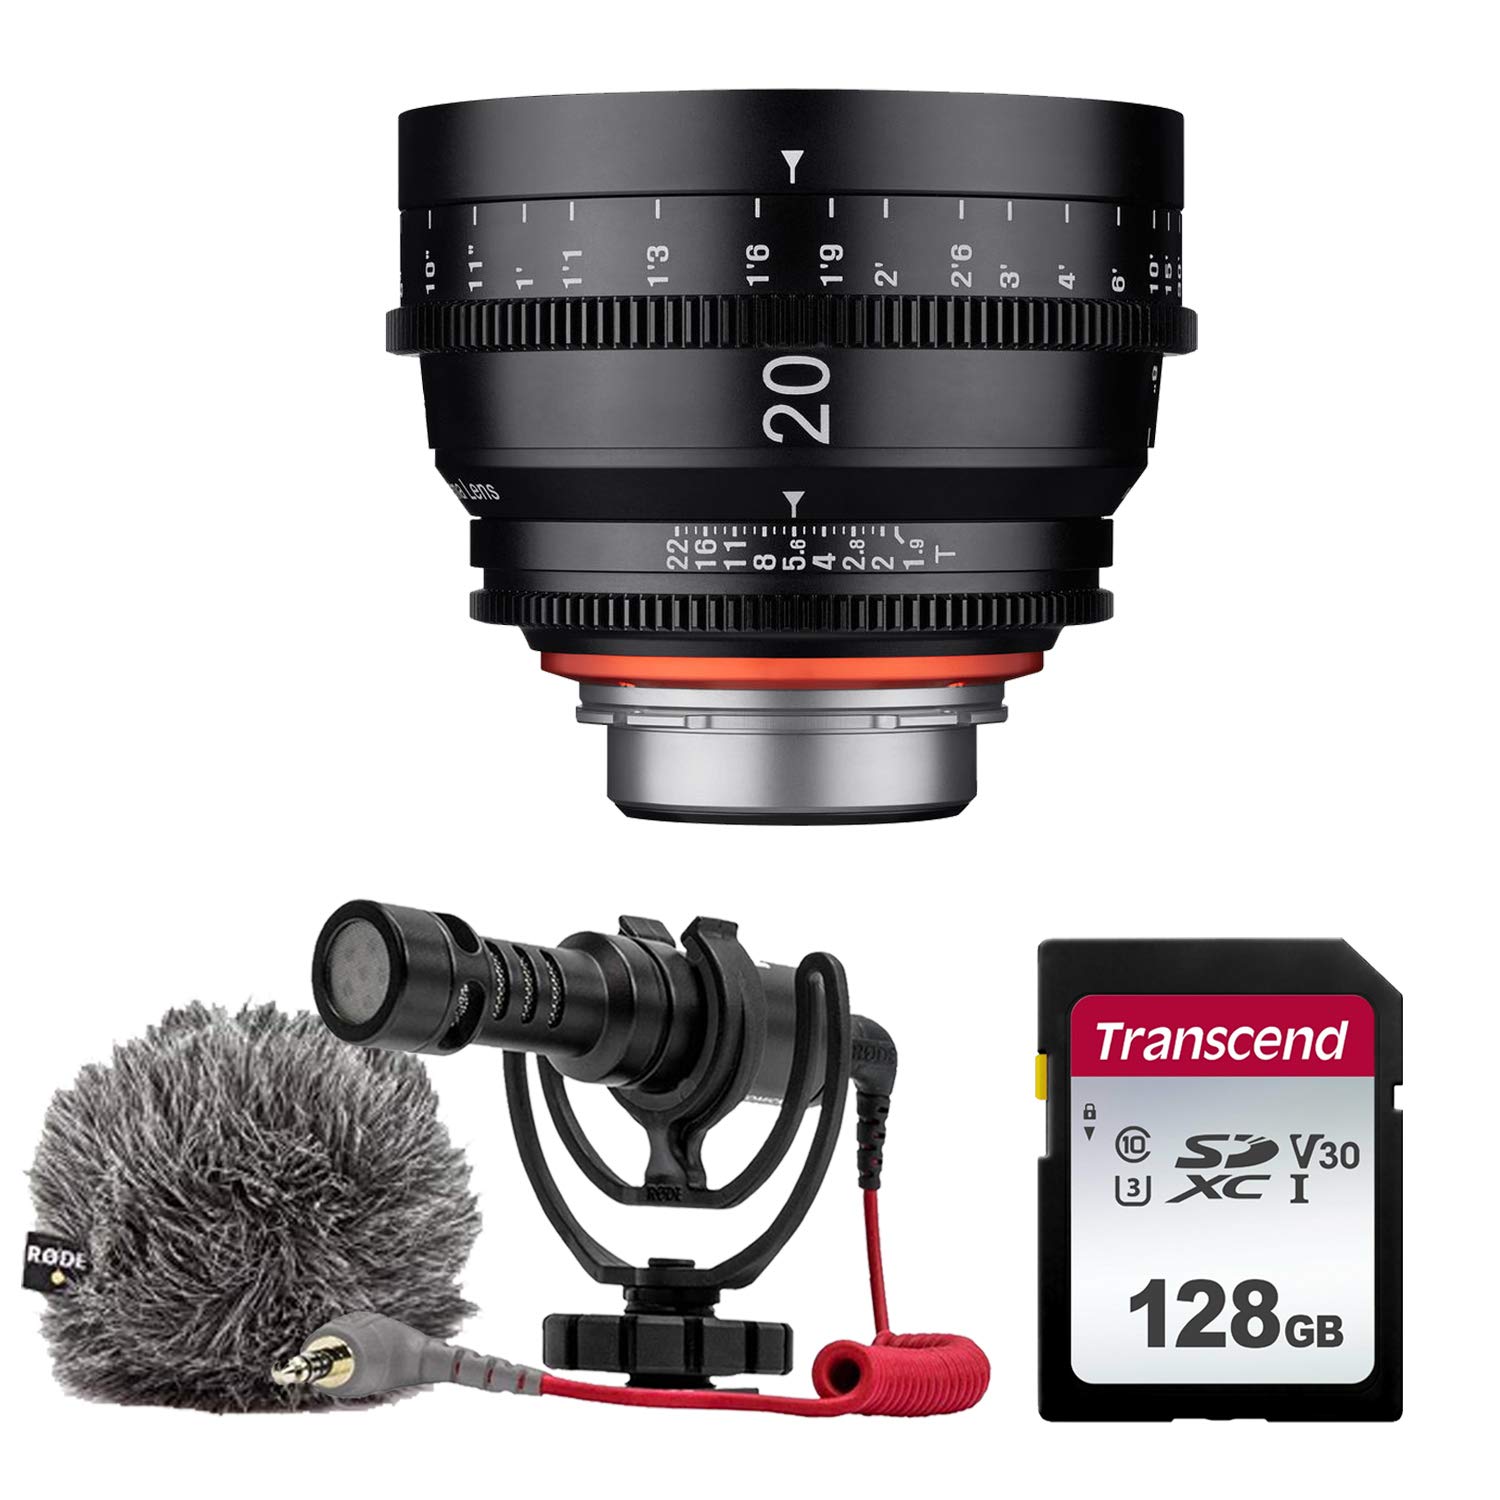 XEEN by ROKINON 20mm T1.9 Professional Cine Lens for PL Mount Rode VideoMicro Compact On-Camera Microphone with Shock Mount